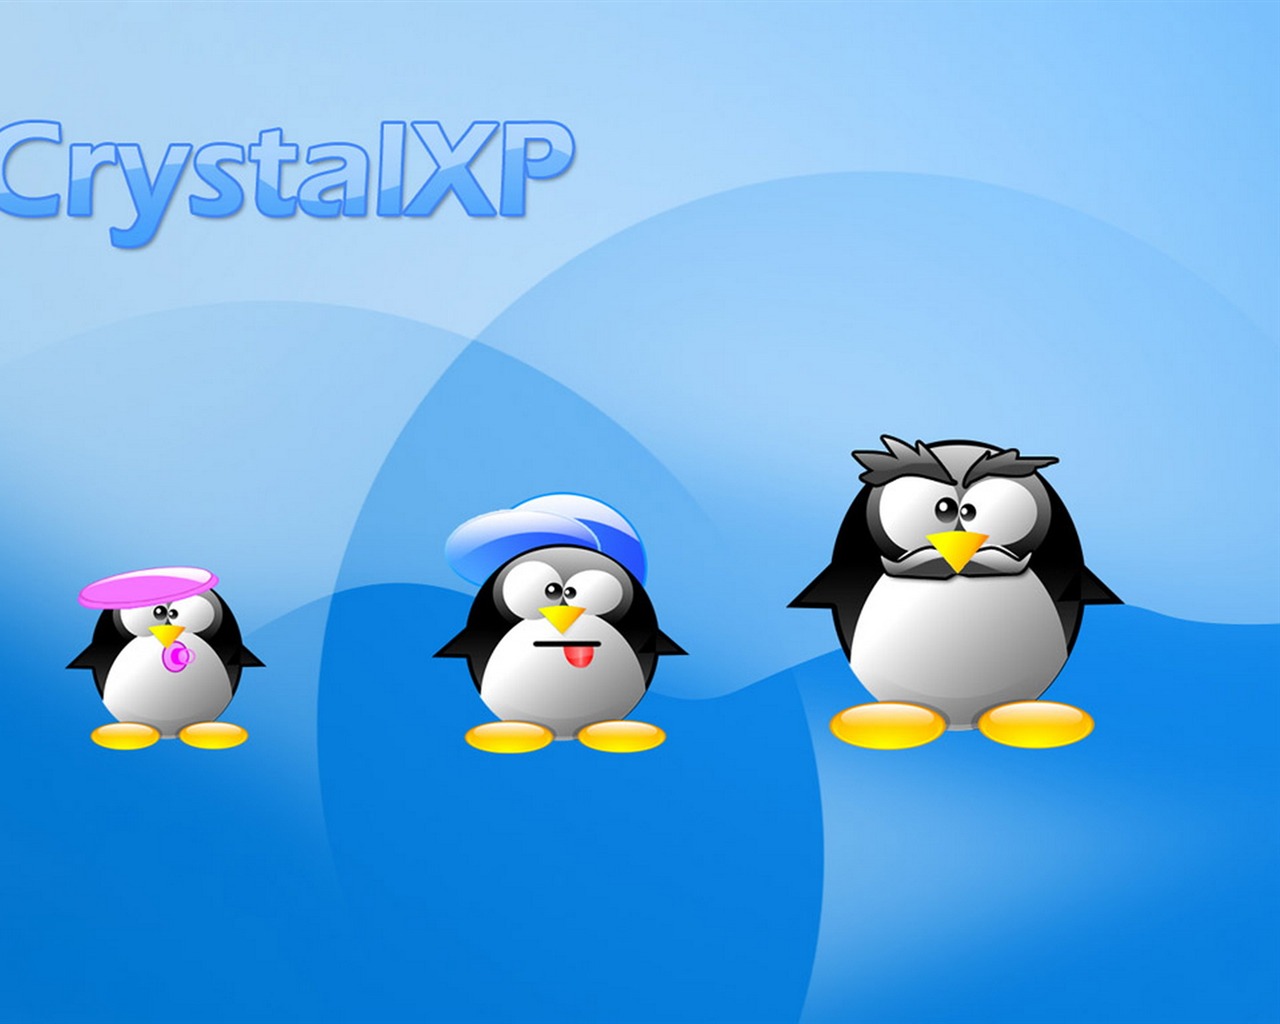 Linux tapety (2) #1 - 1280x1024